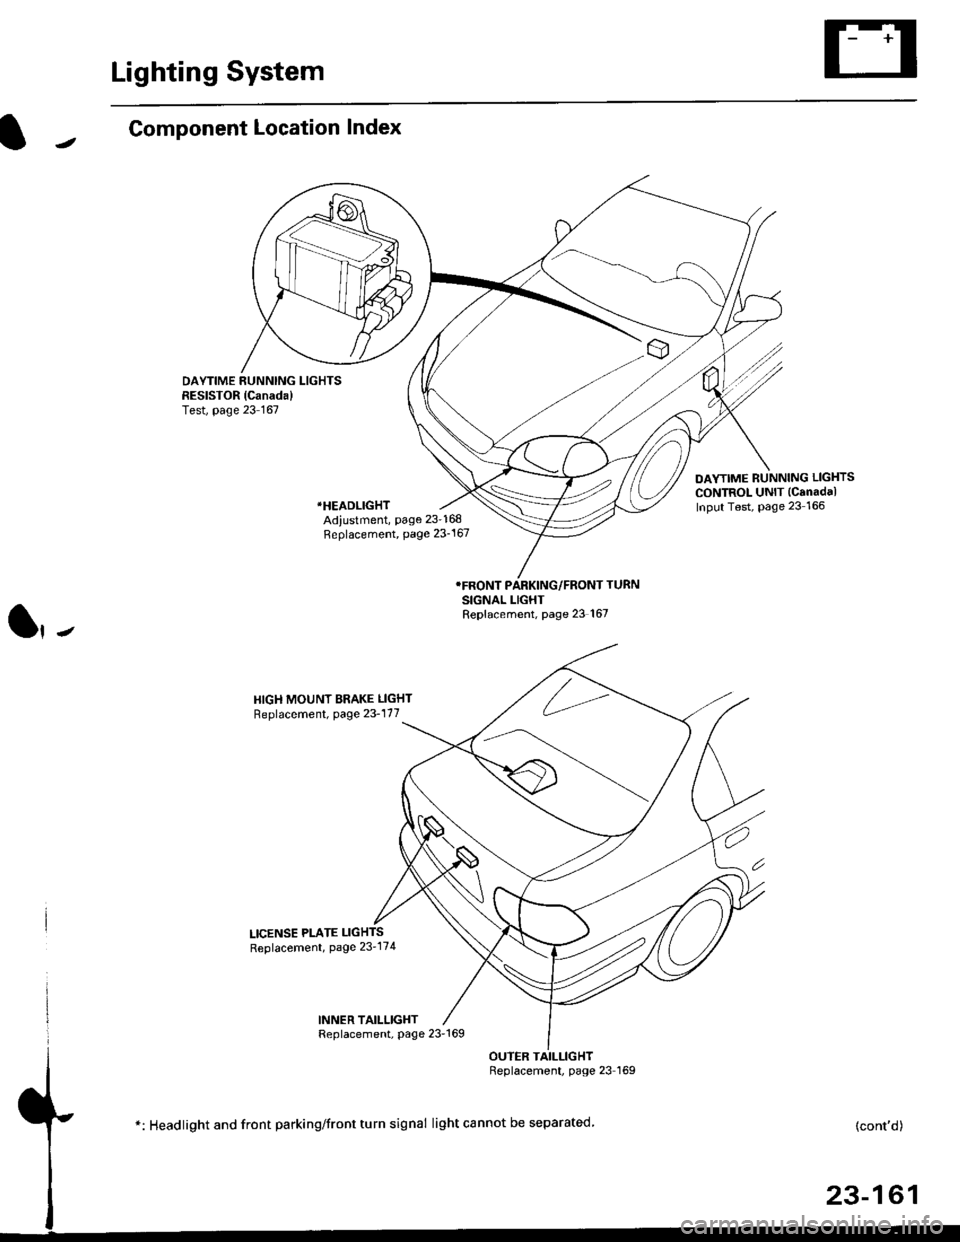 HONDA CIVIC 2000 6.G Workshop Manual Lighting System
Component Location Index
DAYTIME RUNNING LIGHTSRESISTOR {Canada)Test, page 23 167
DAYTIME RUNNING LIGHTS
CONTROL UNIT (Canadal
Input Test, Page 23 166*HEADLIGHT
Adiustment, page 23-168